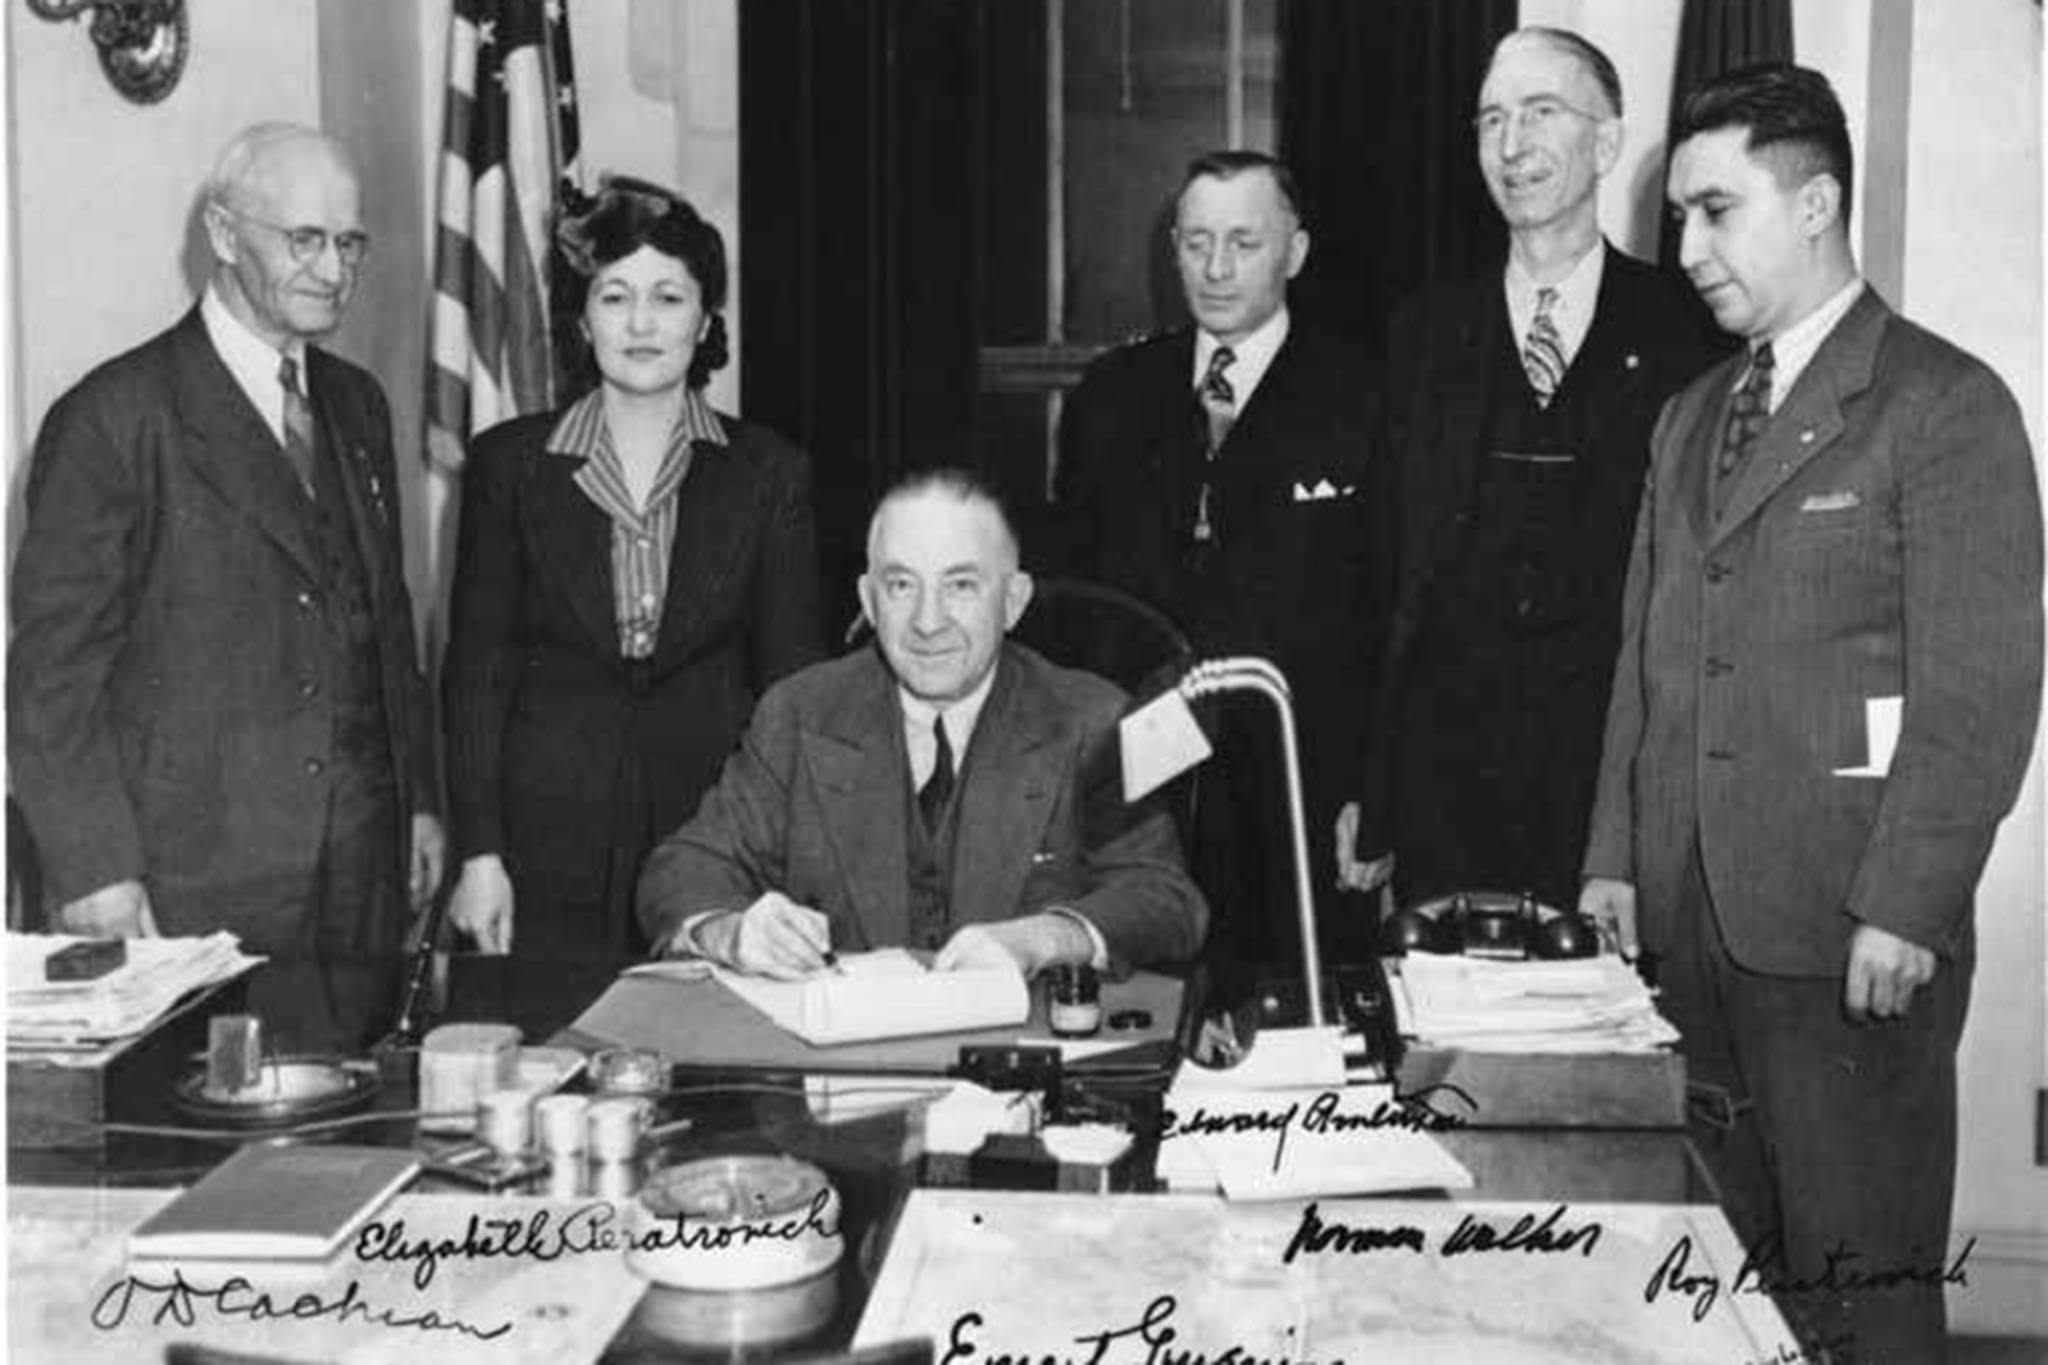 Gov. Ernest Gruening (seated) signs the Alaska Anti-Discrimination Act of 1945. Witnessing are O. D. Cochran, Elizabeth Peratrovich, Edward Anderson, Norman Walker and Roy Peratrovich. (Courtesy Photo / Alaska State Library - Historical Collections)